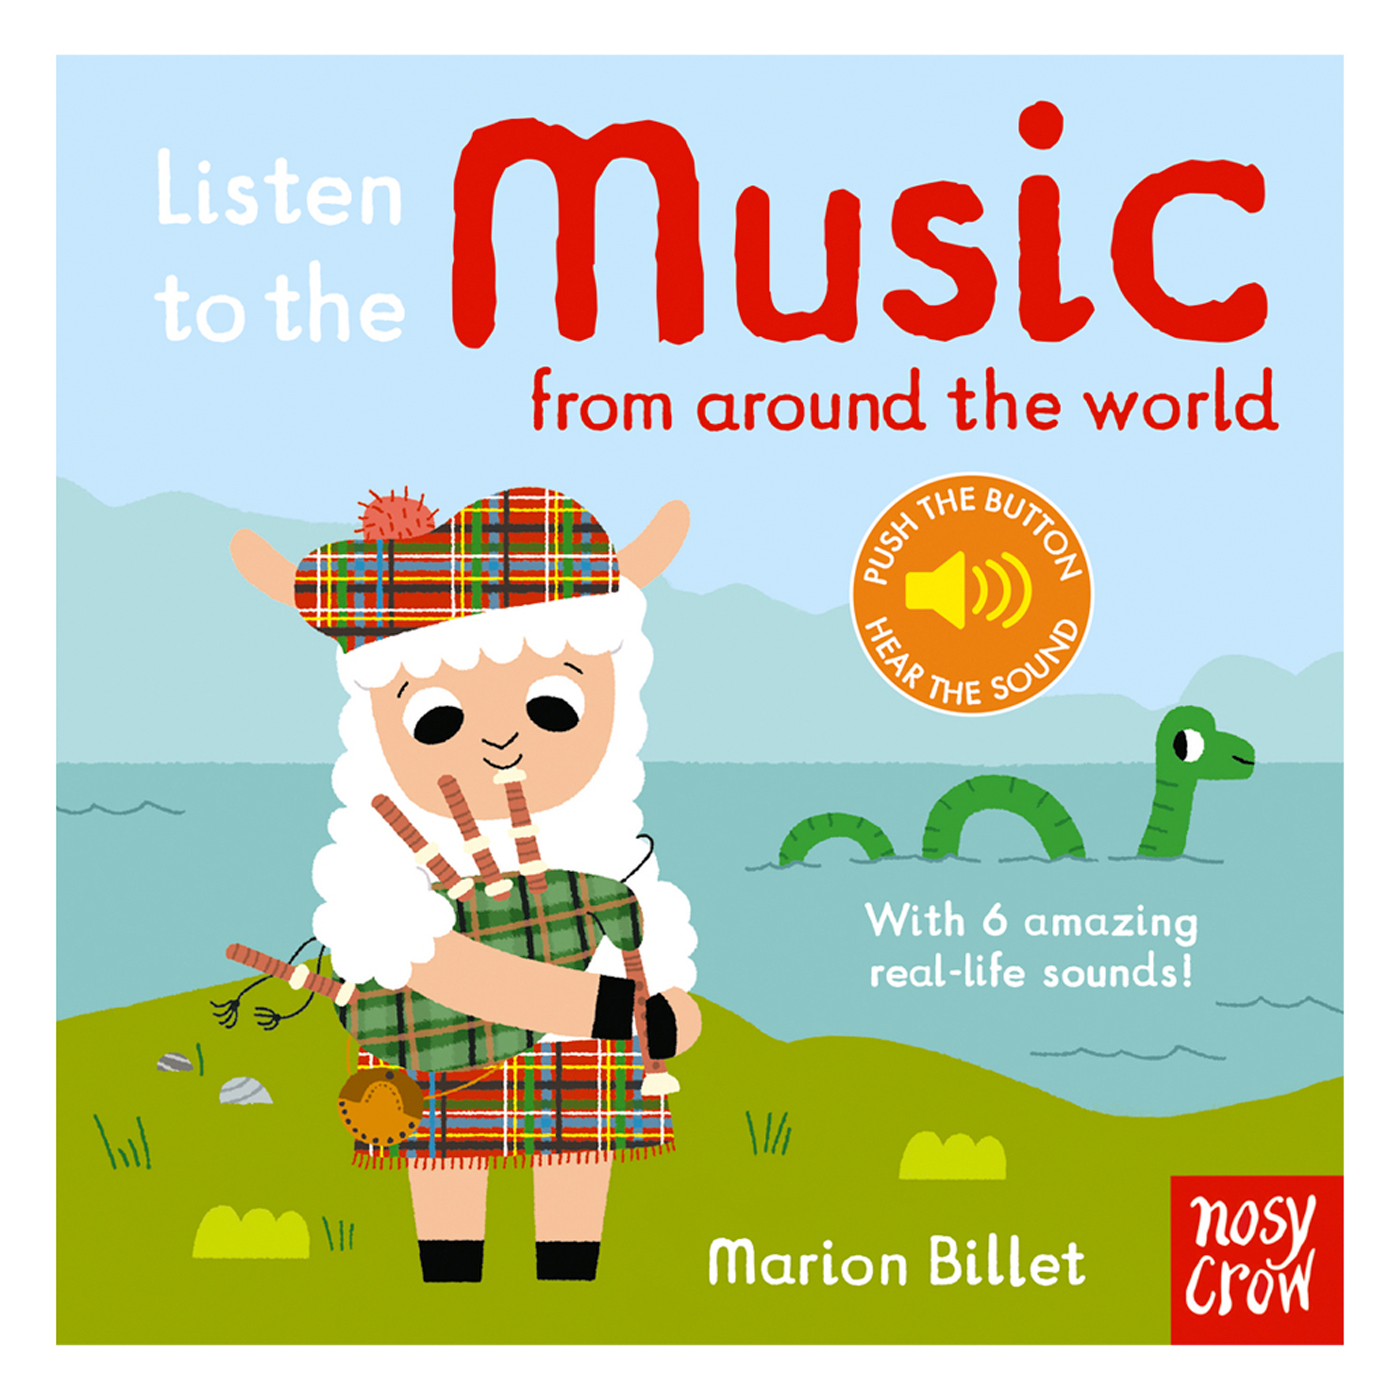  Listen to the: Music from around the world